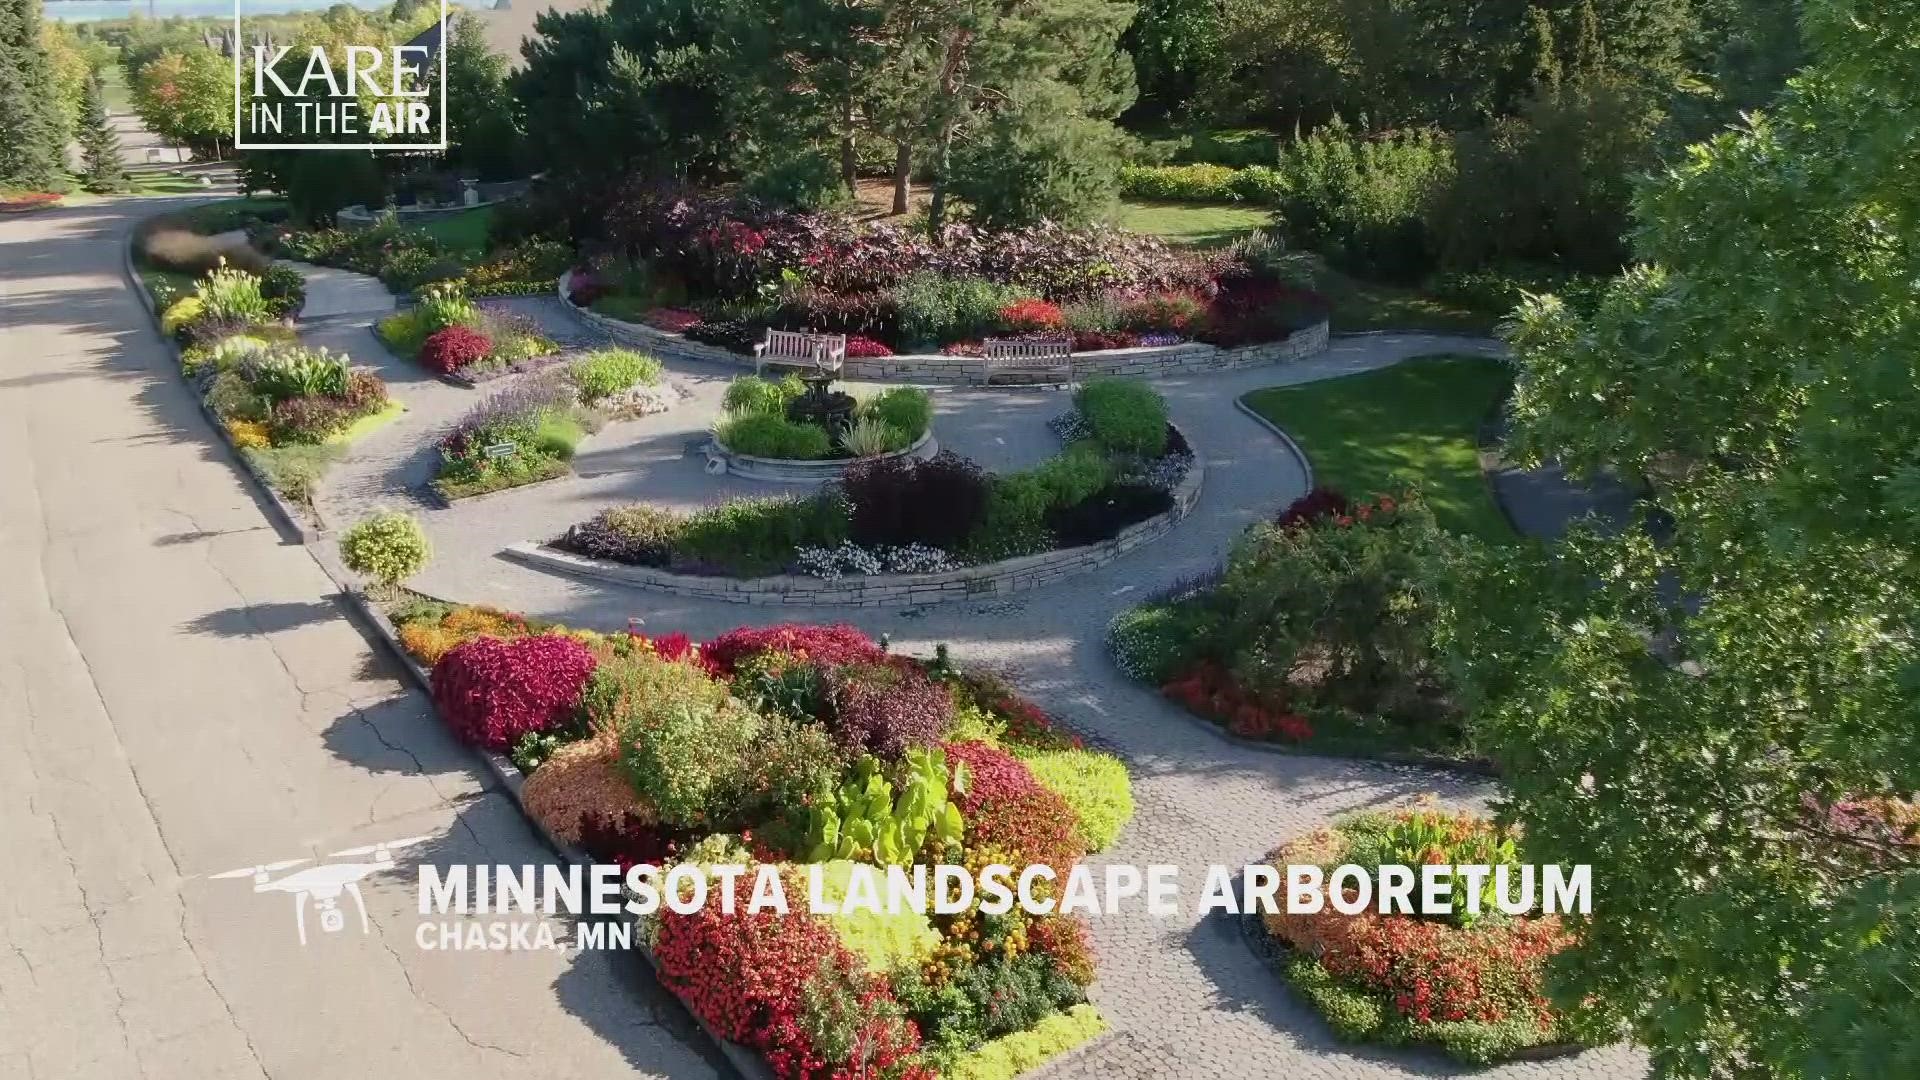 Our KARE 11 drone takes us over this spectacular summer sensation, comprised of 25 to 30 thousand annuals planted and arranged in different color schemes.